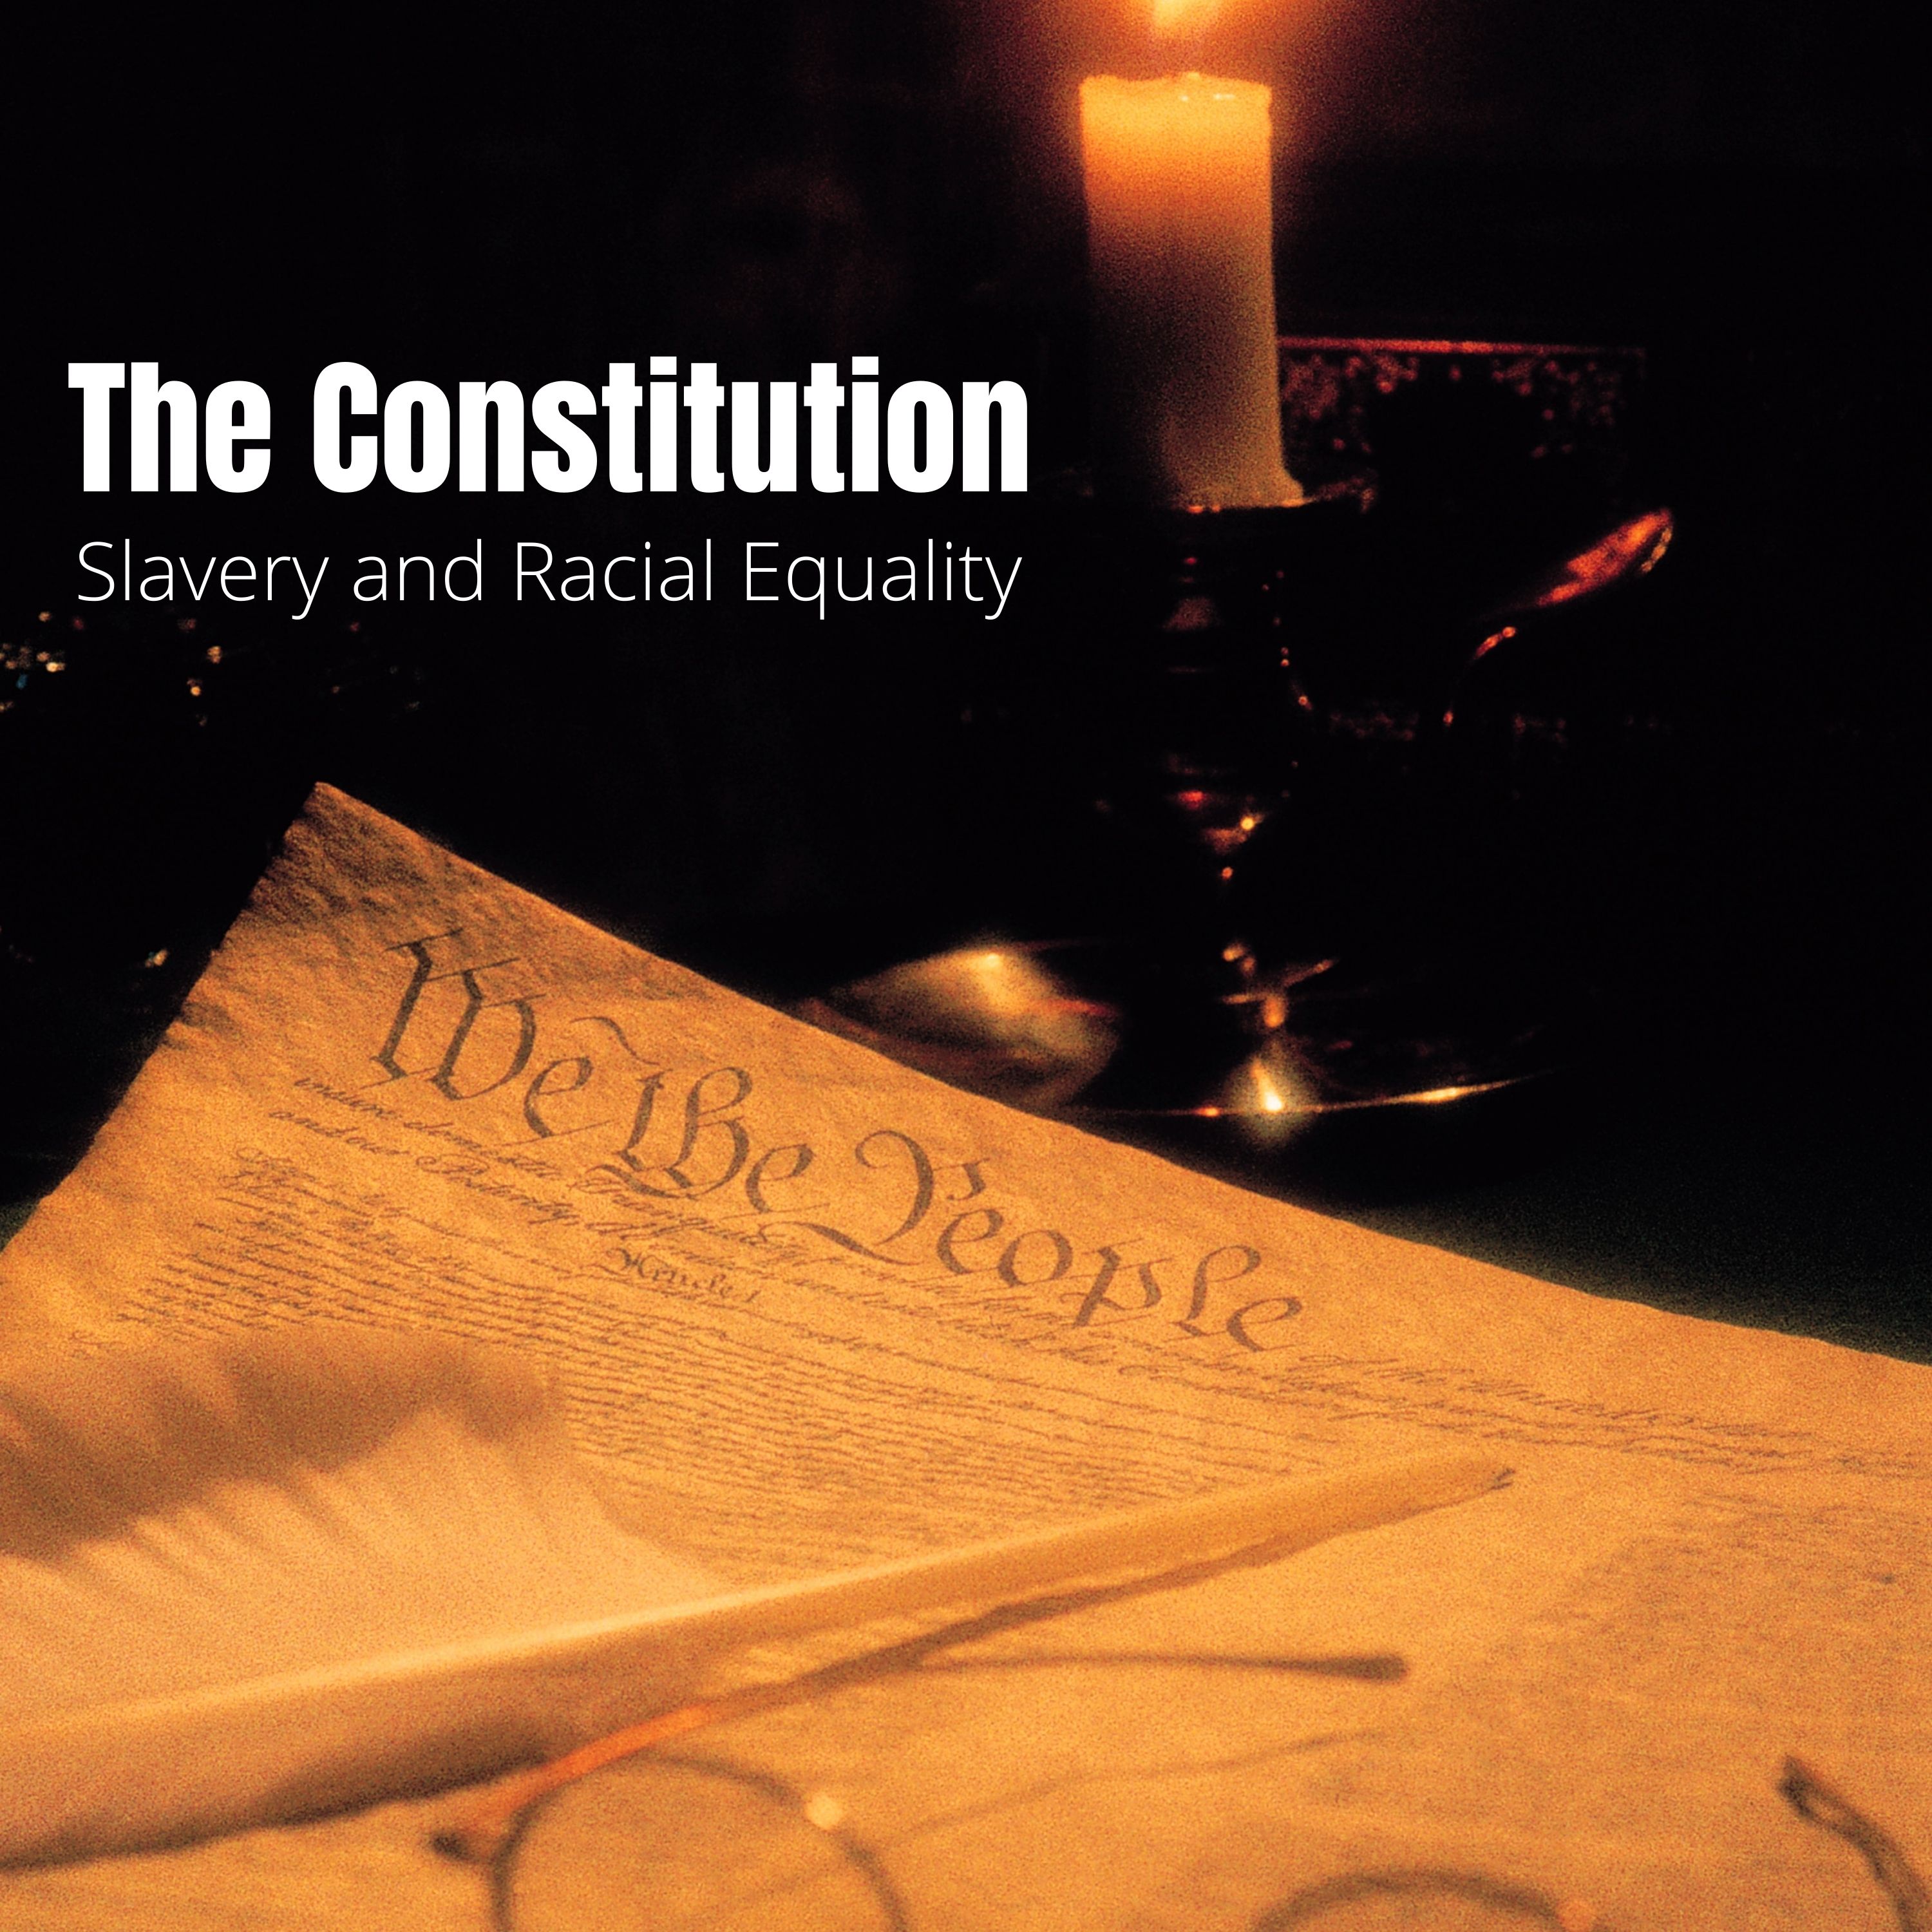 Constitutional Law - Lecture Three: Slavery and Racial Equality